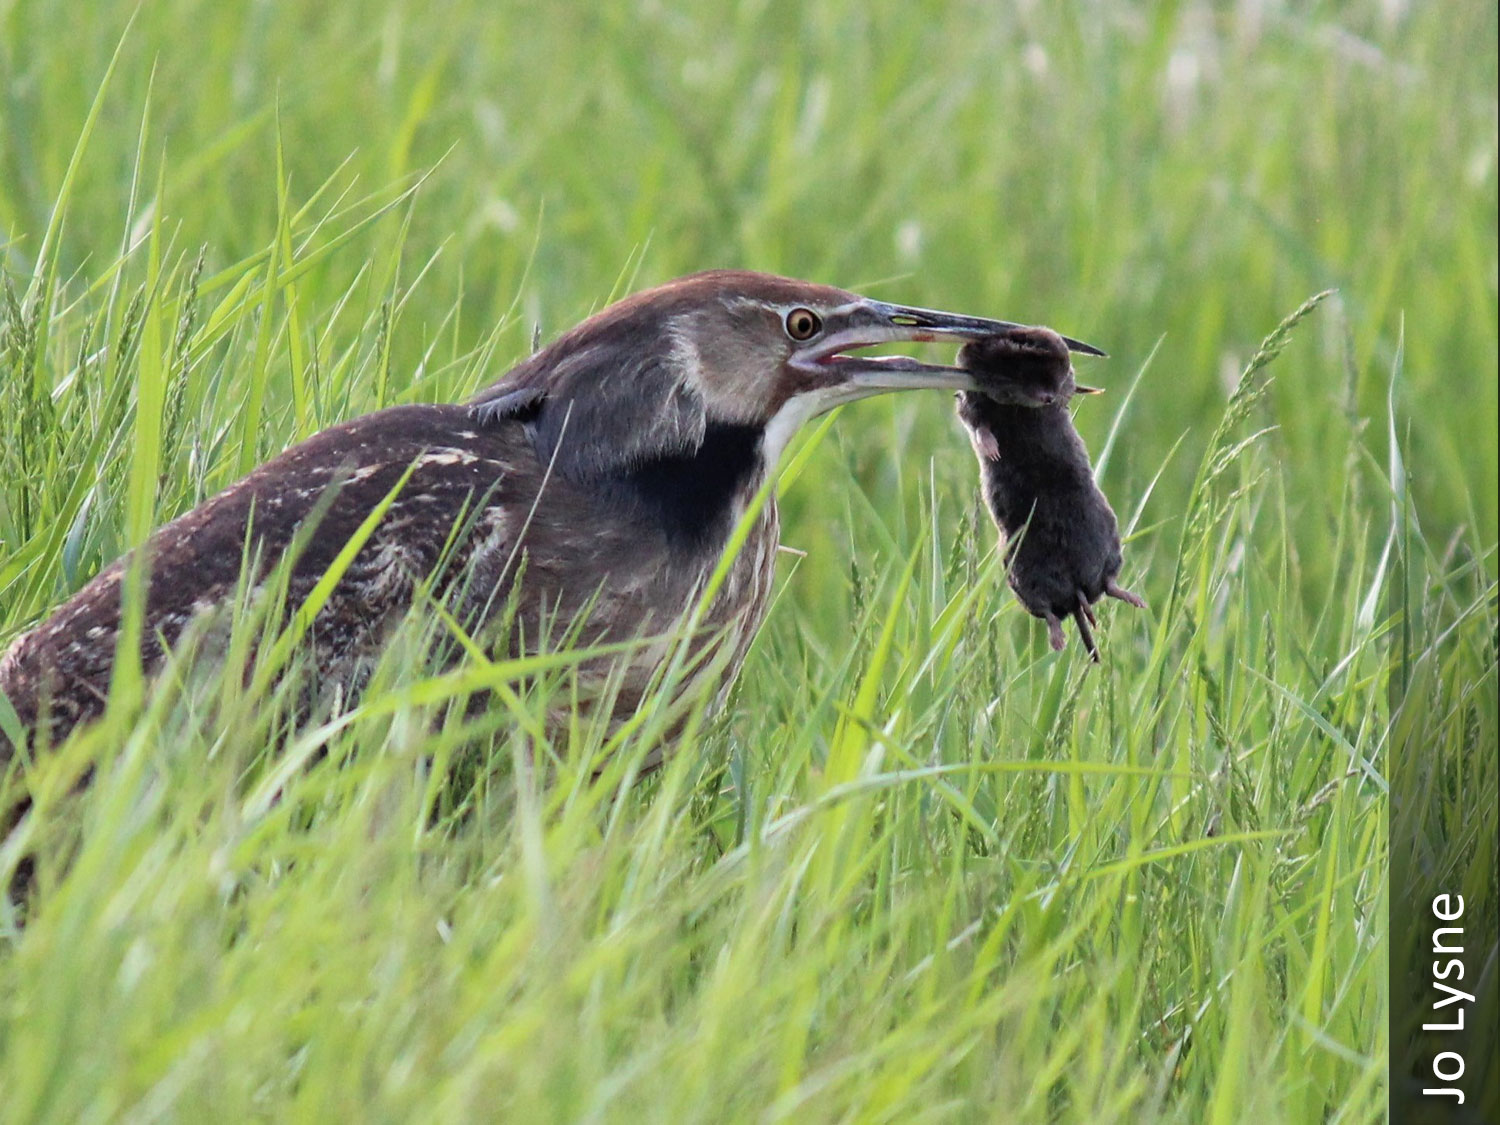 American bittern with short-tailed shrew